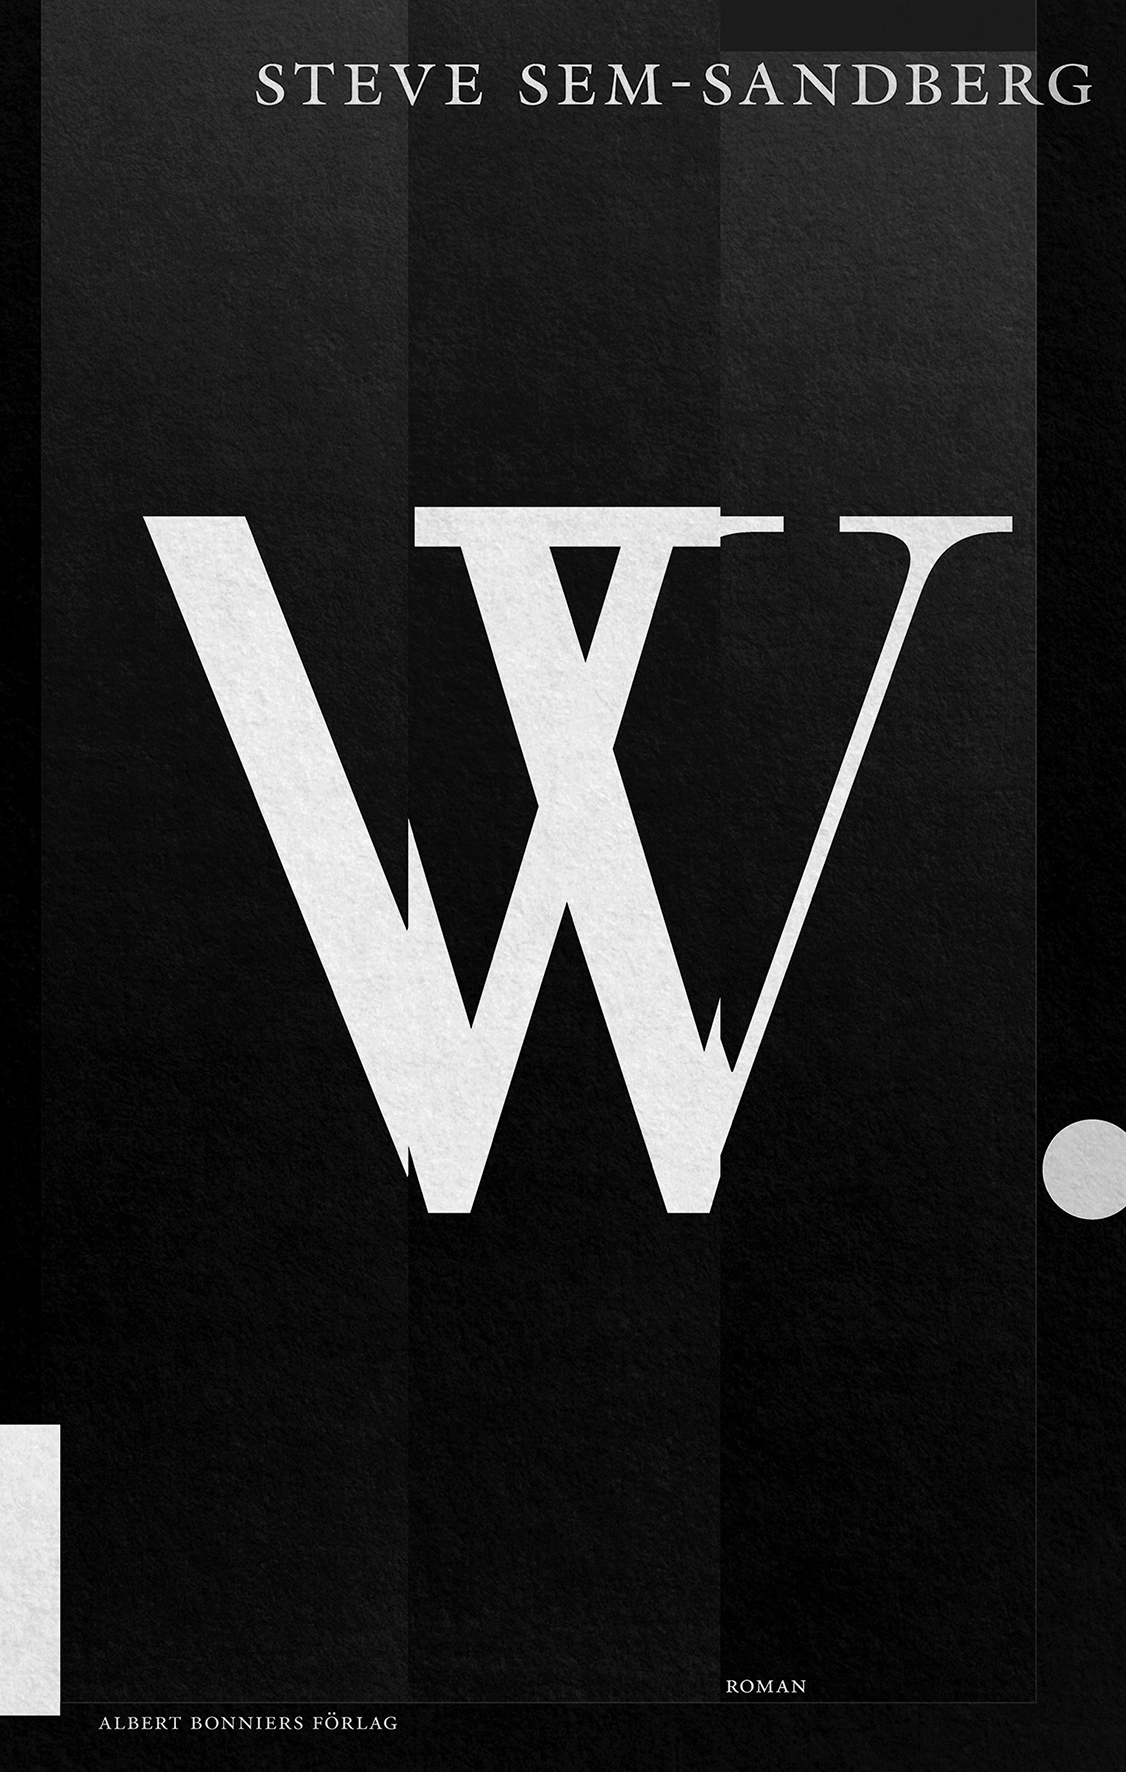 Book cover of "W", it's black with the letter W in white.